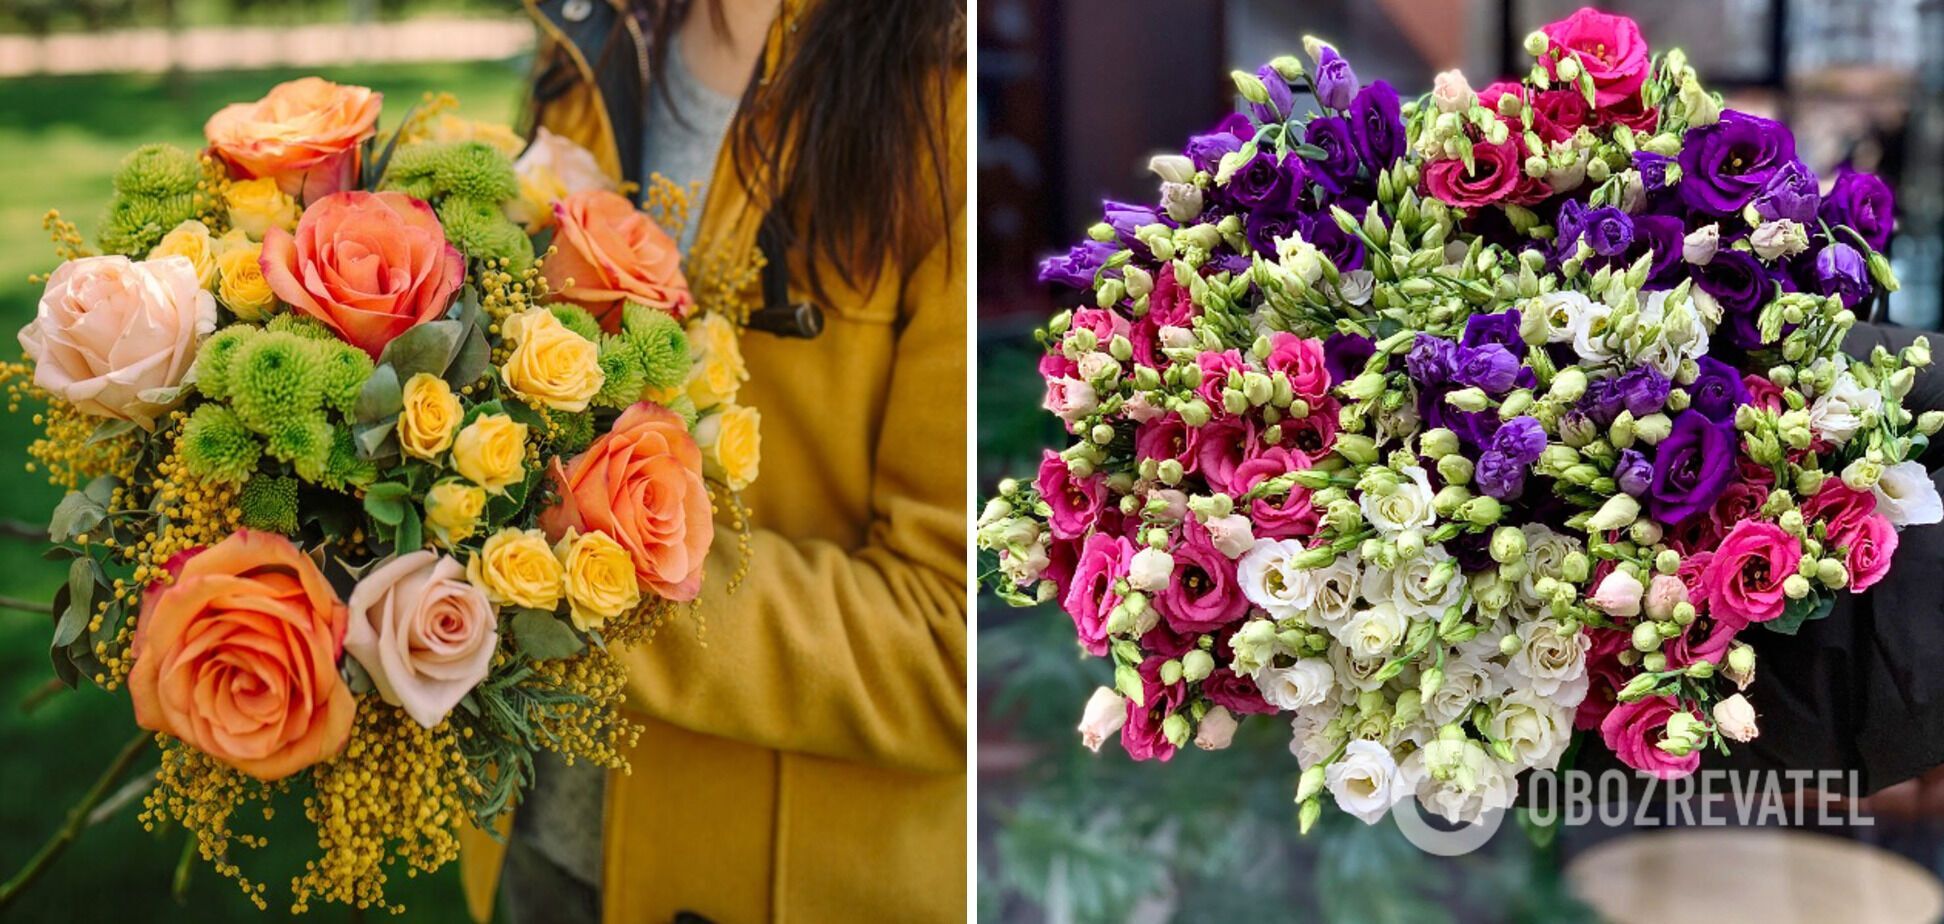 What flowers to give to your beloved, mother, sister for the spring holiday: the most successful bouquets